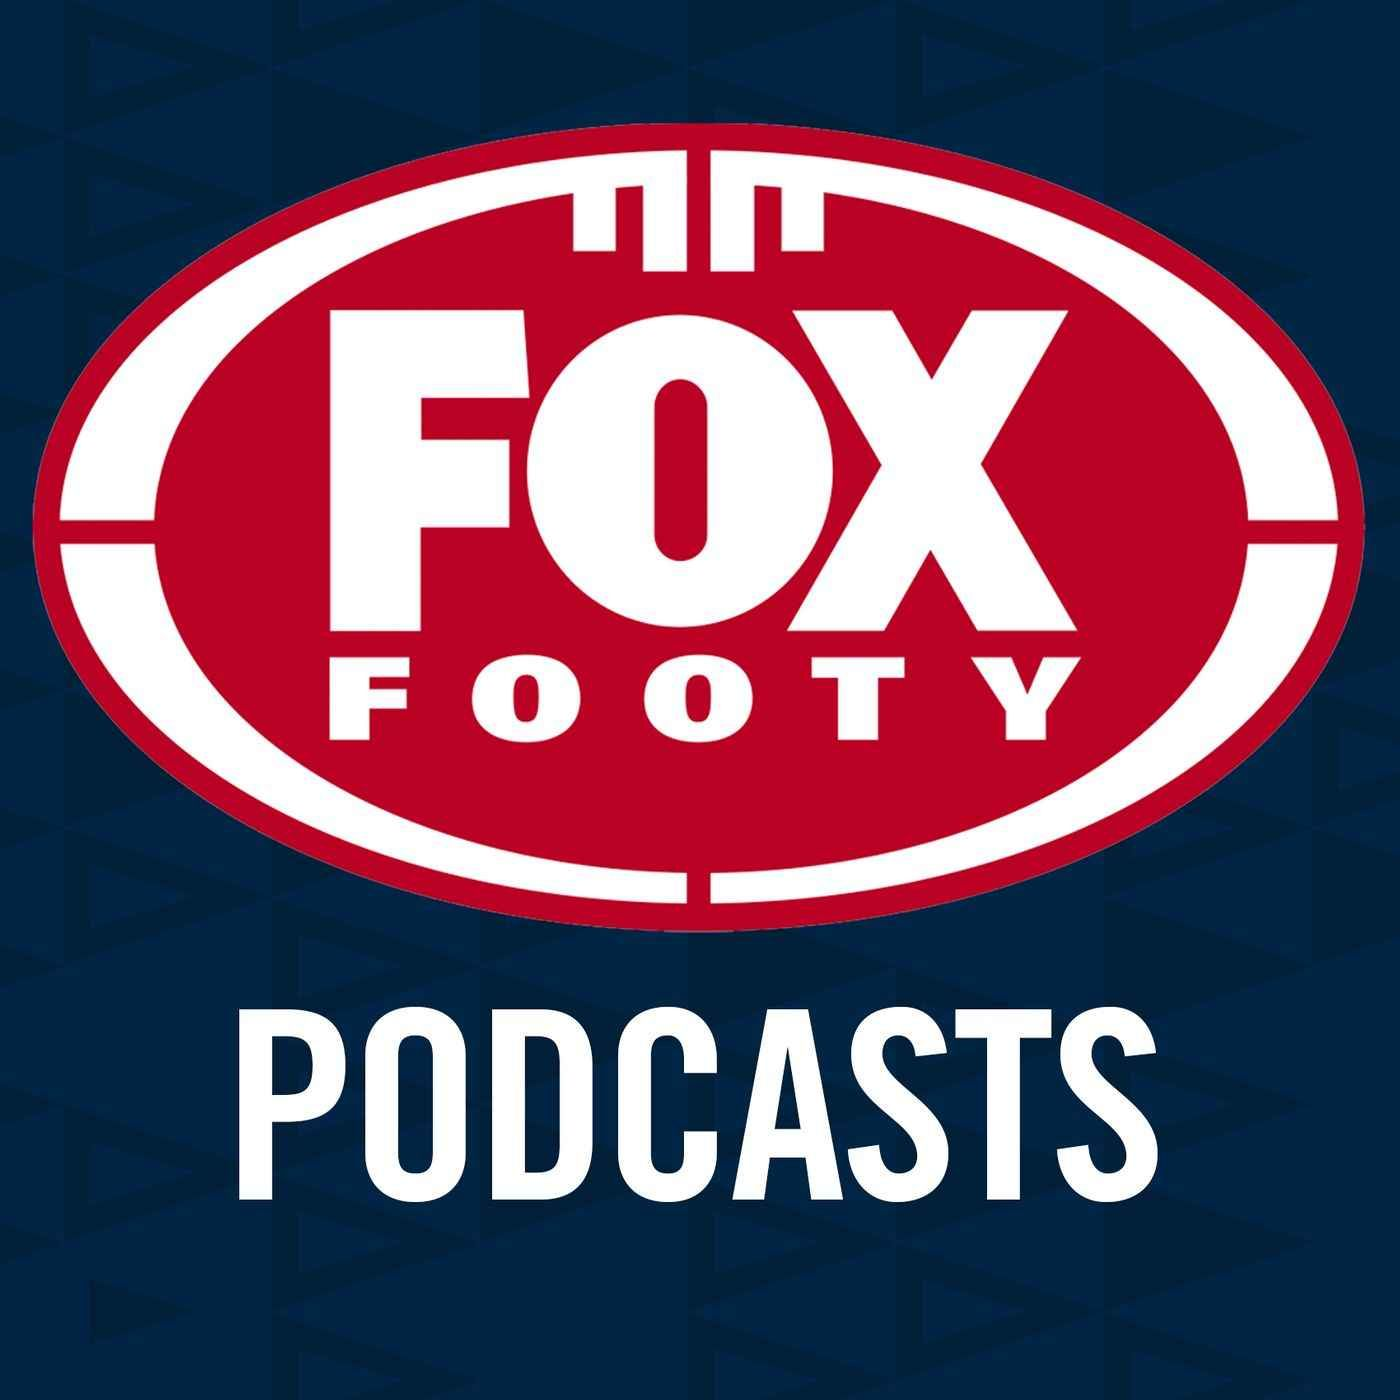 Fox Footy Podcast: The return-to-play state of play